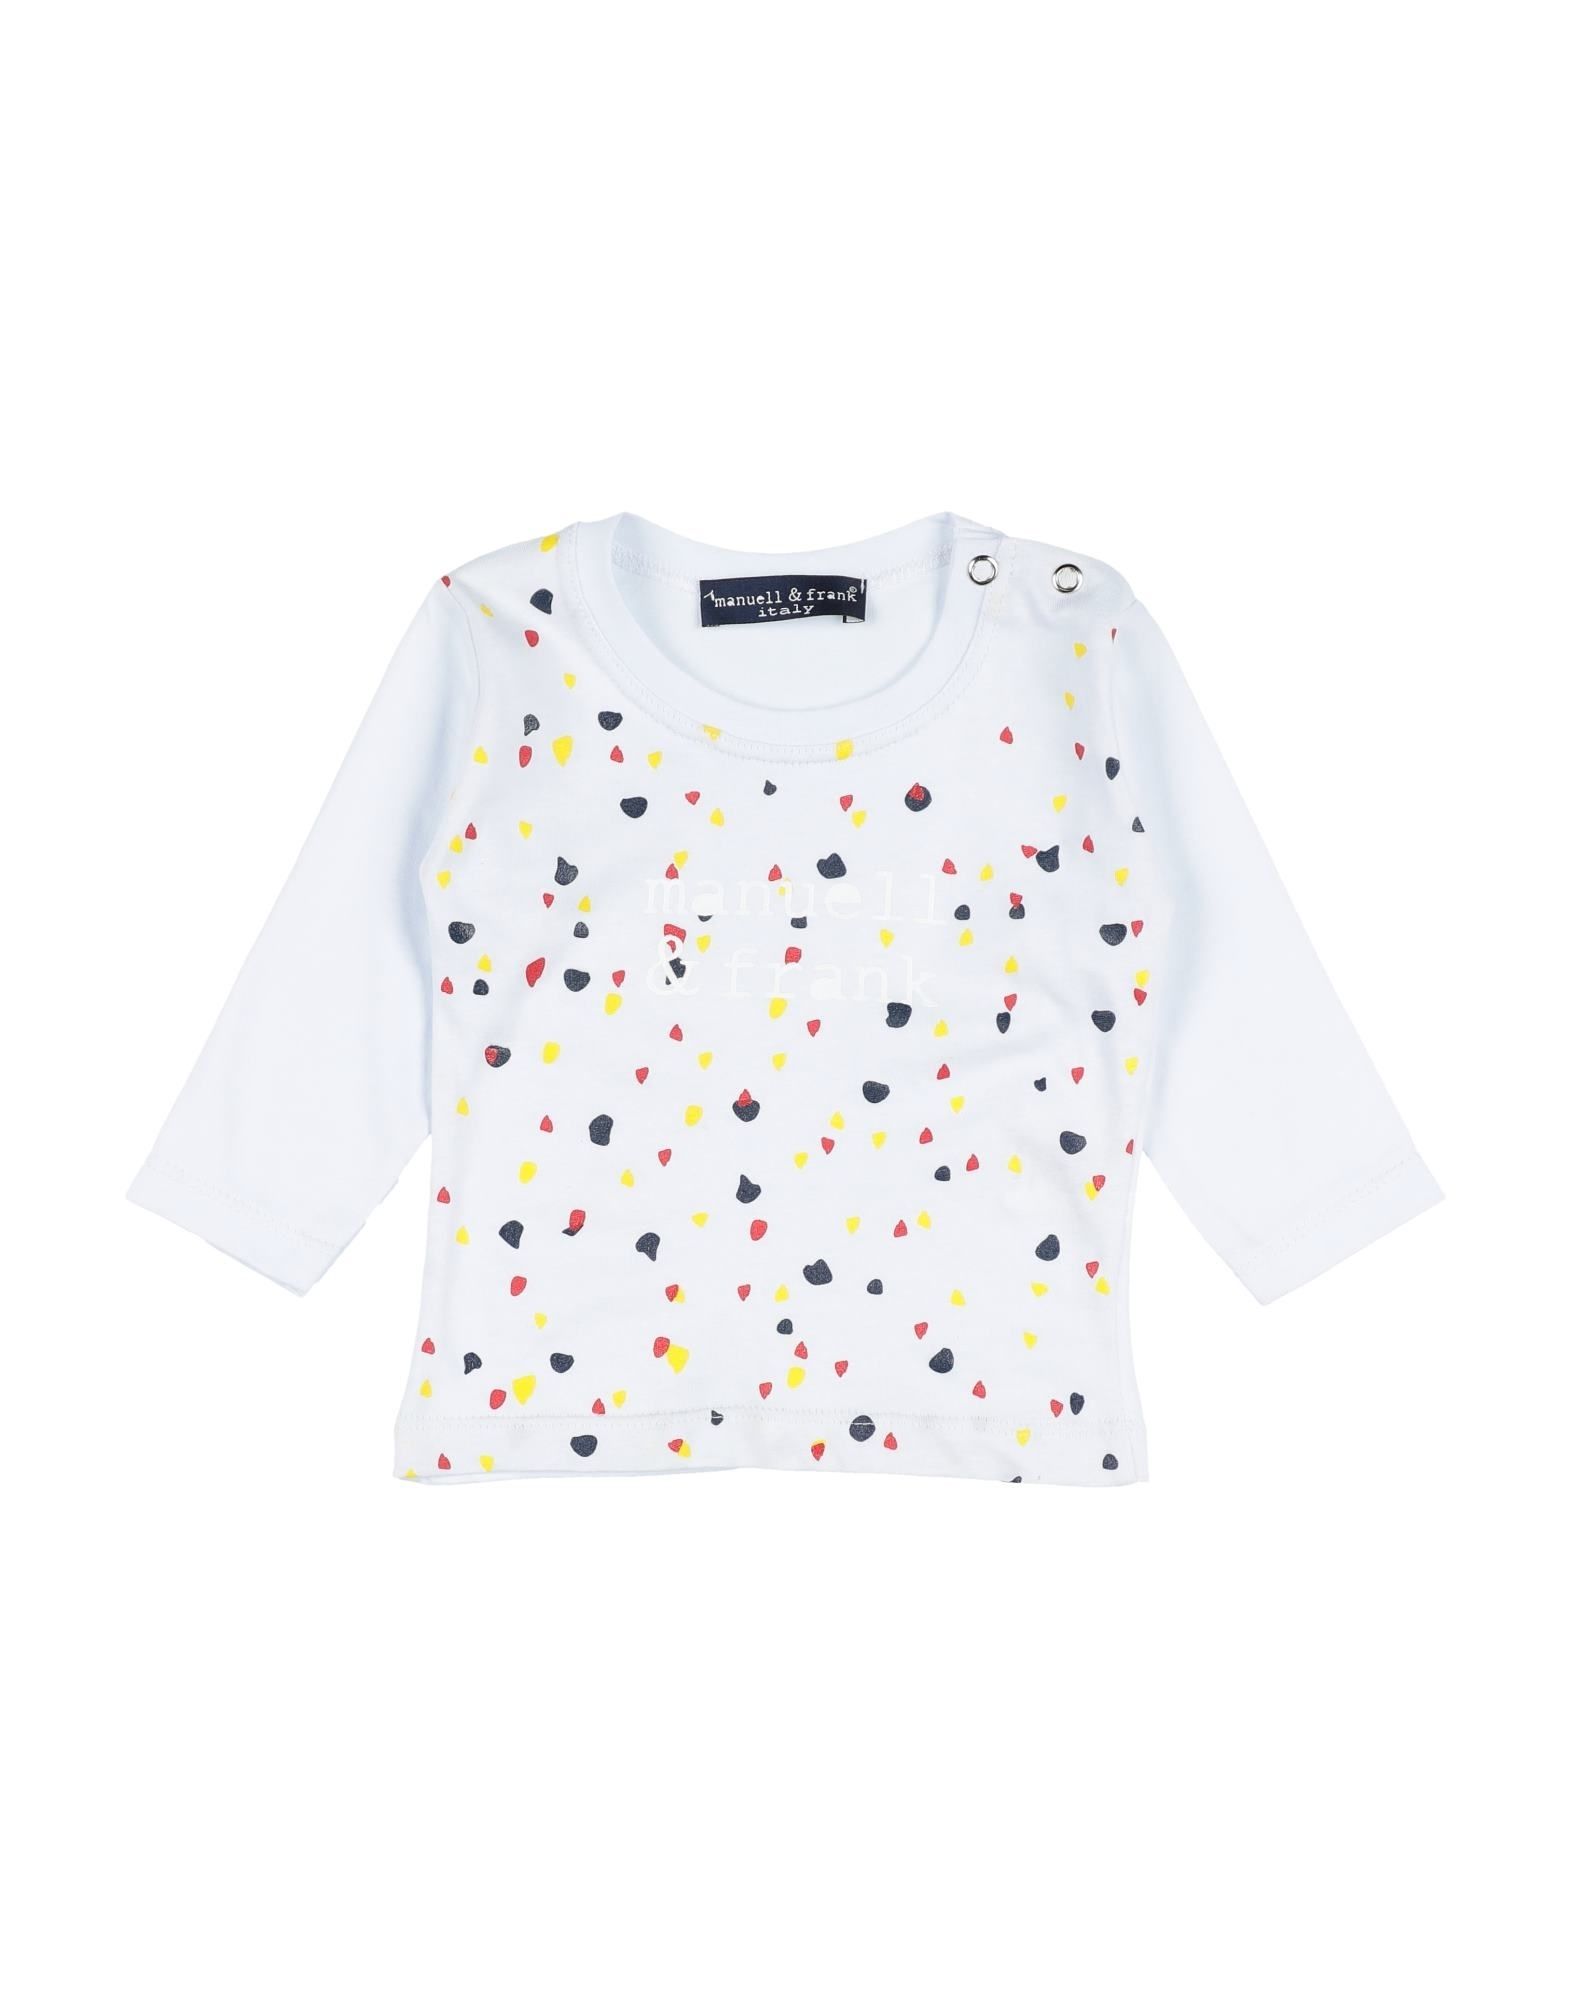 Manuell & Frank Kids' T-shirts In White